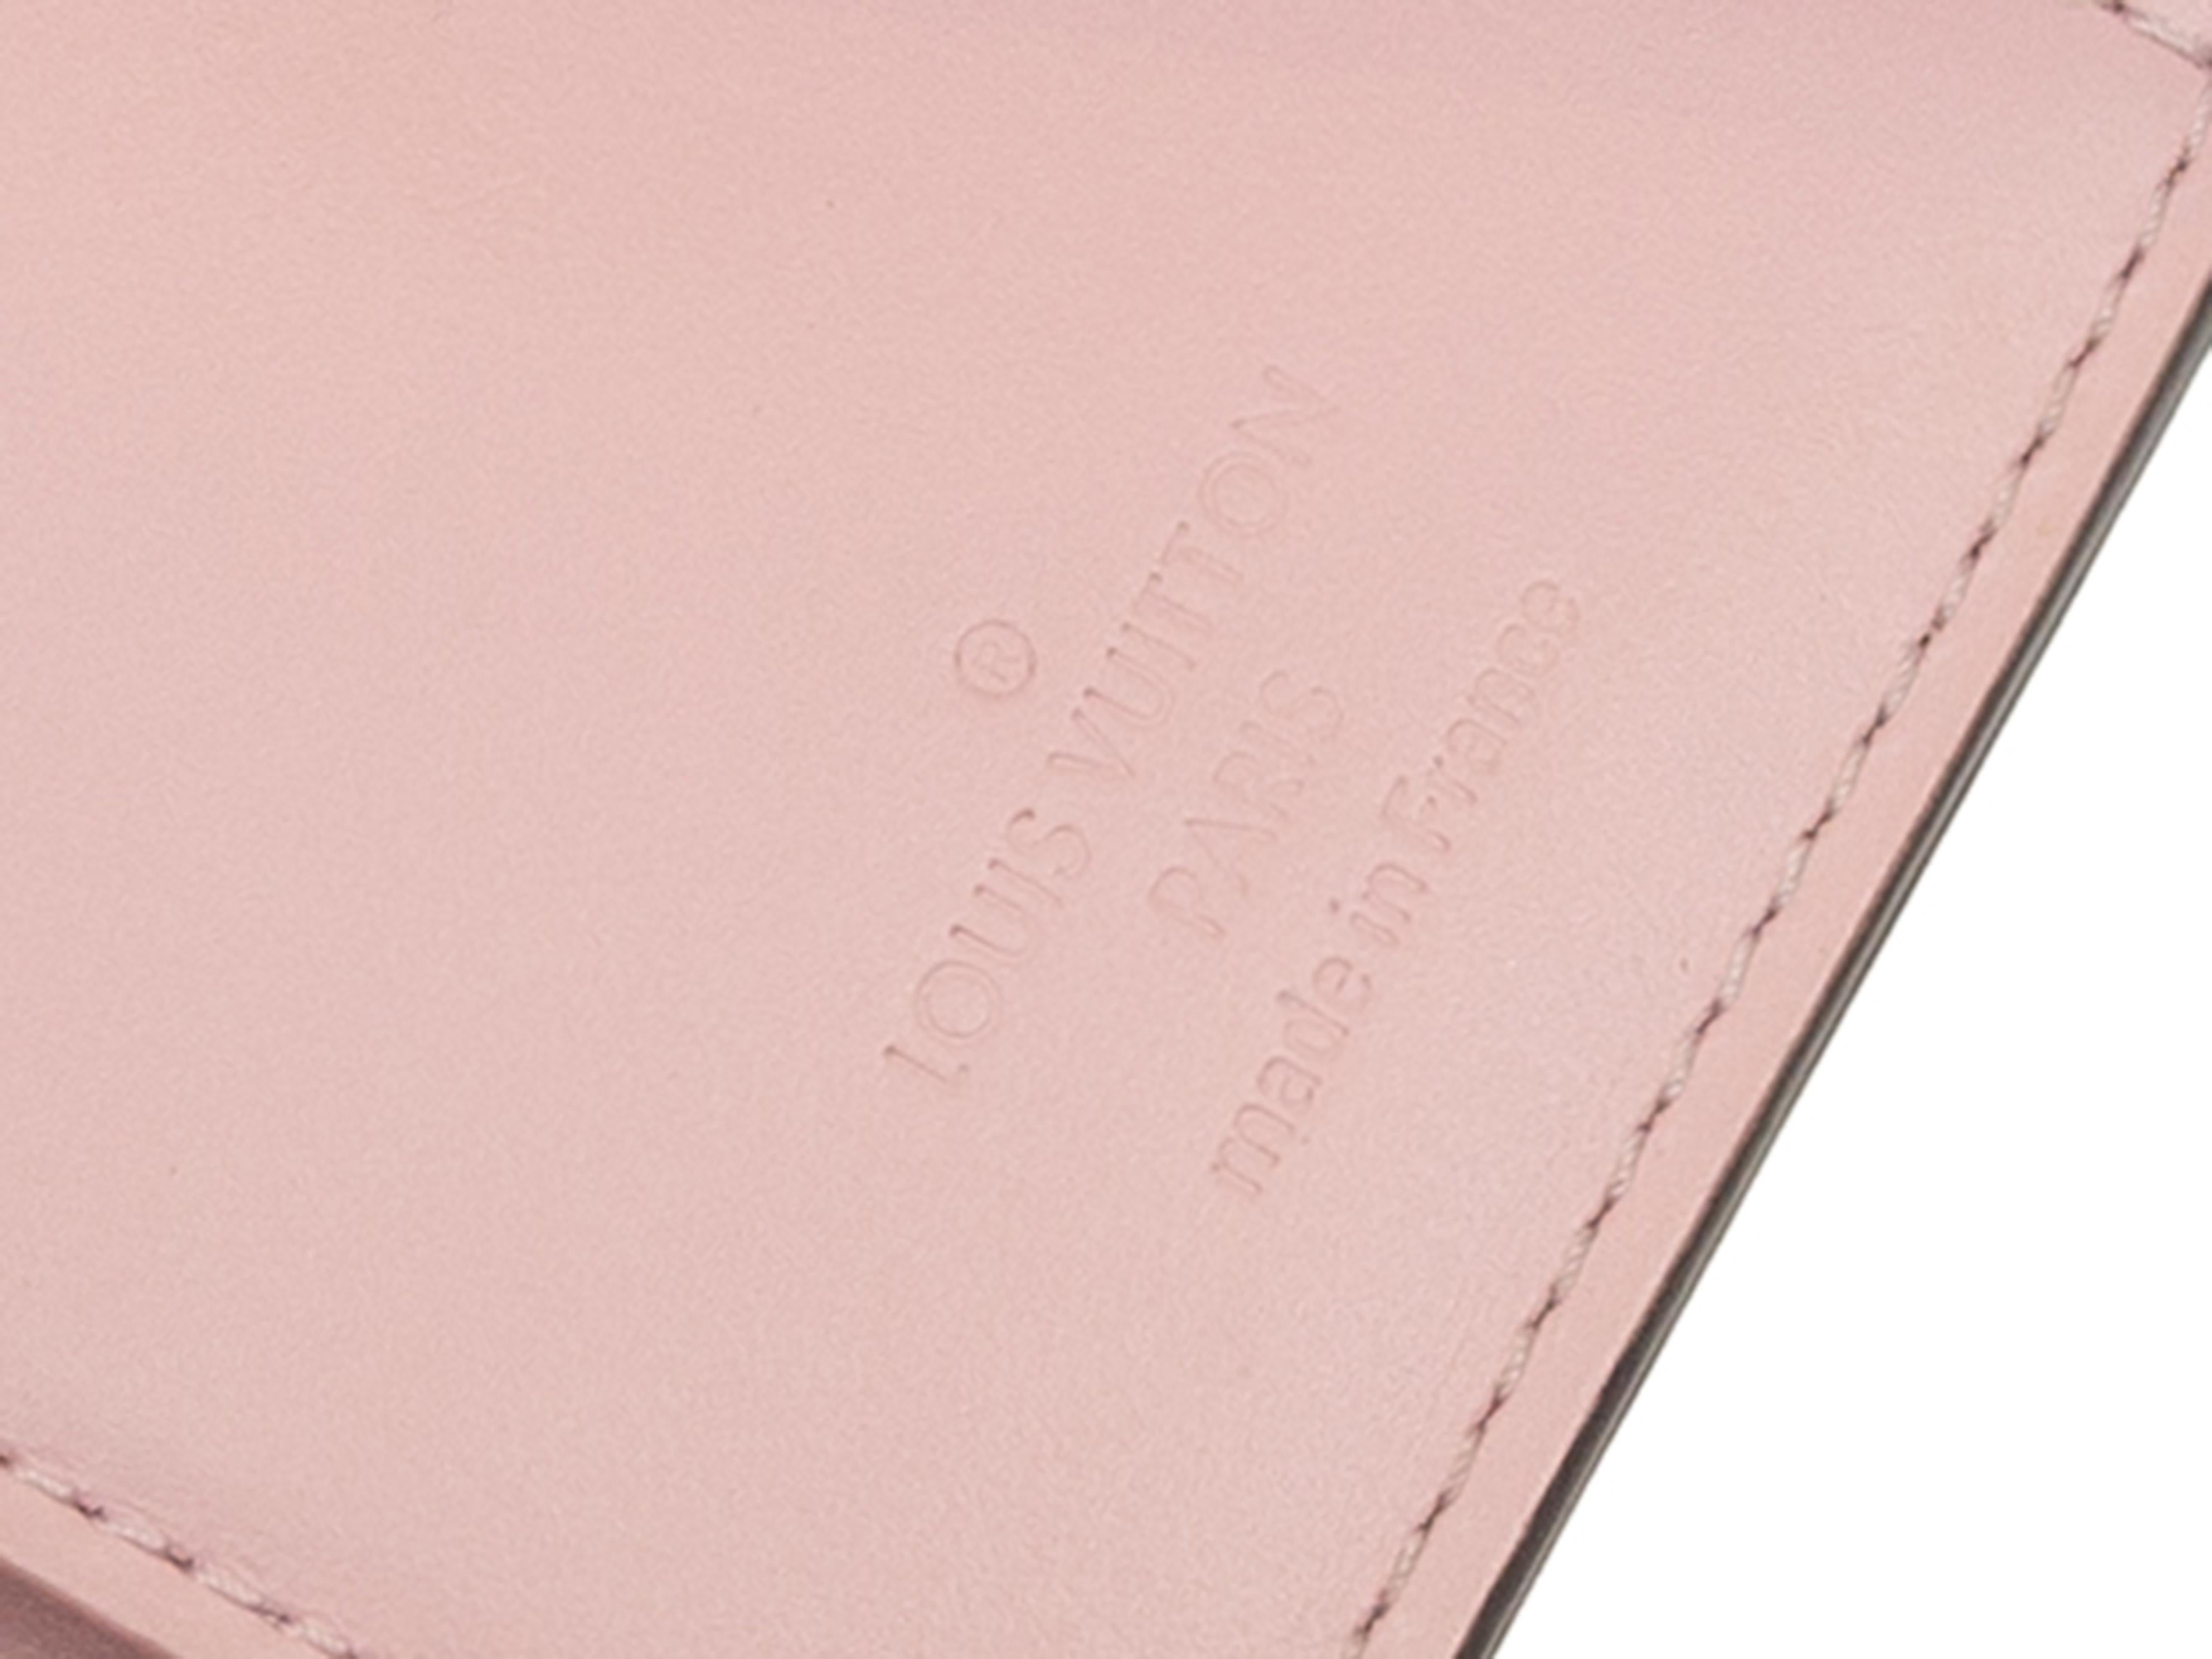 Product details: Light pink Vernis leather Victorine wallet by Louis Vuitton. Interior card and cash slots. Gold-tone hardware. 3.5